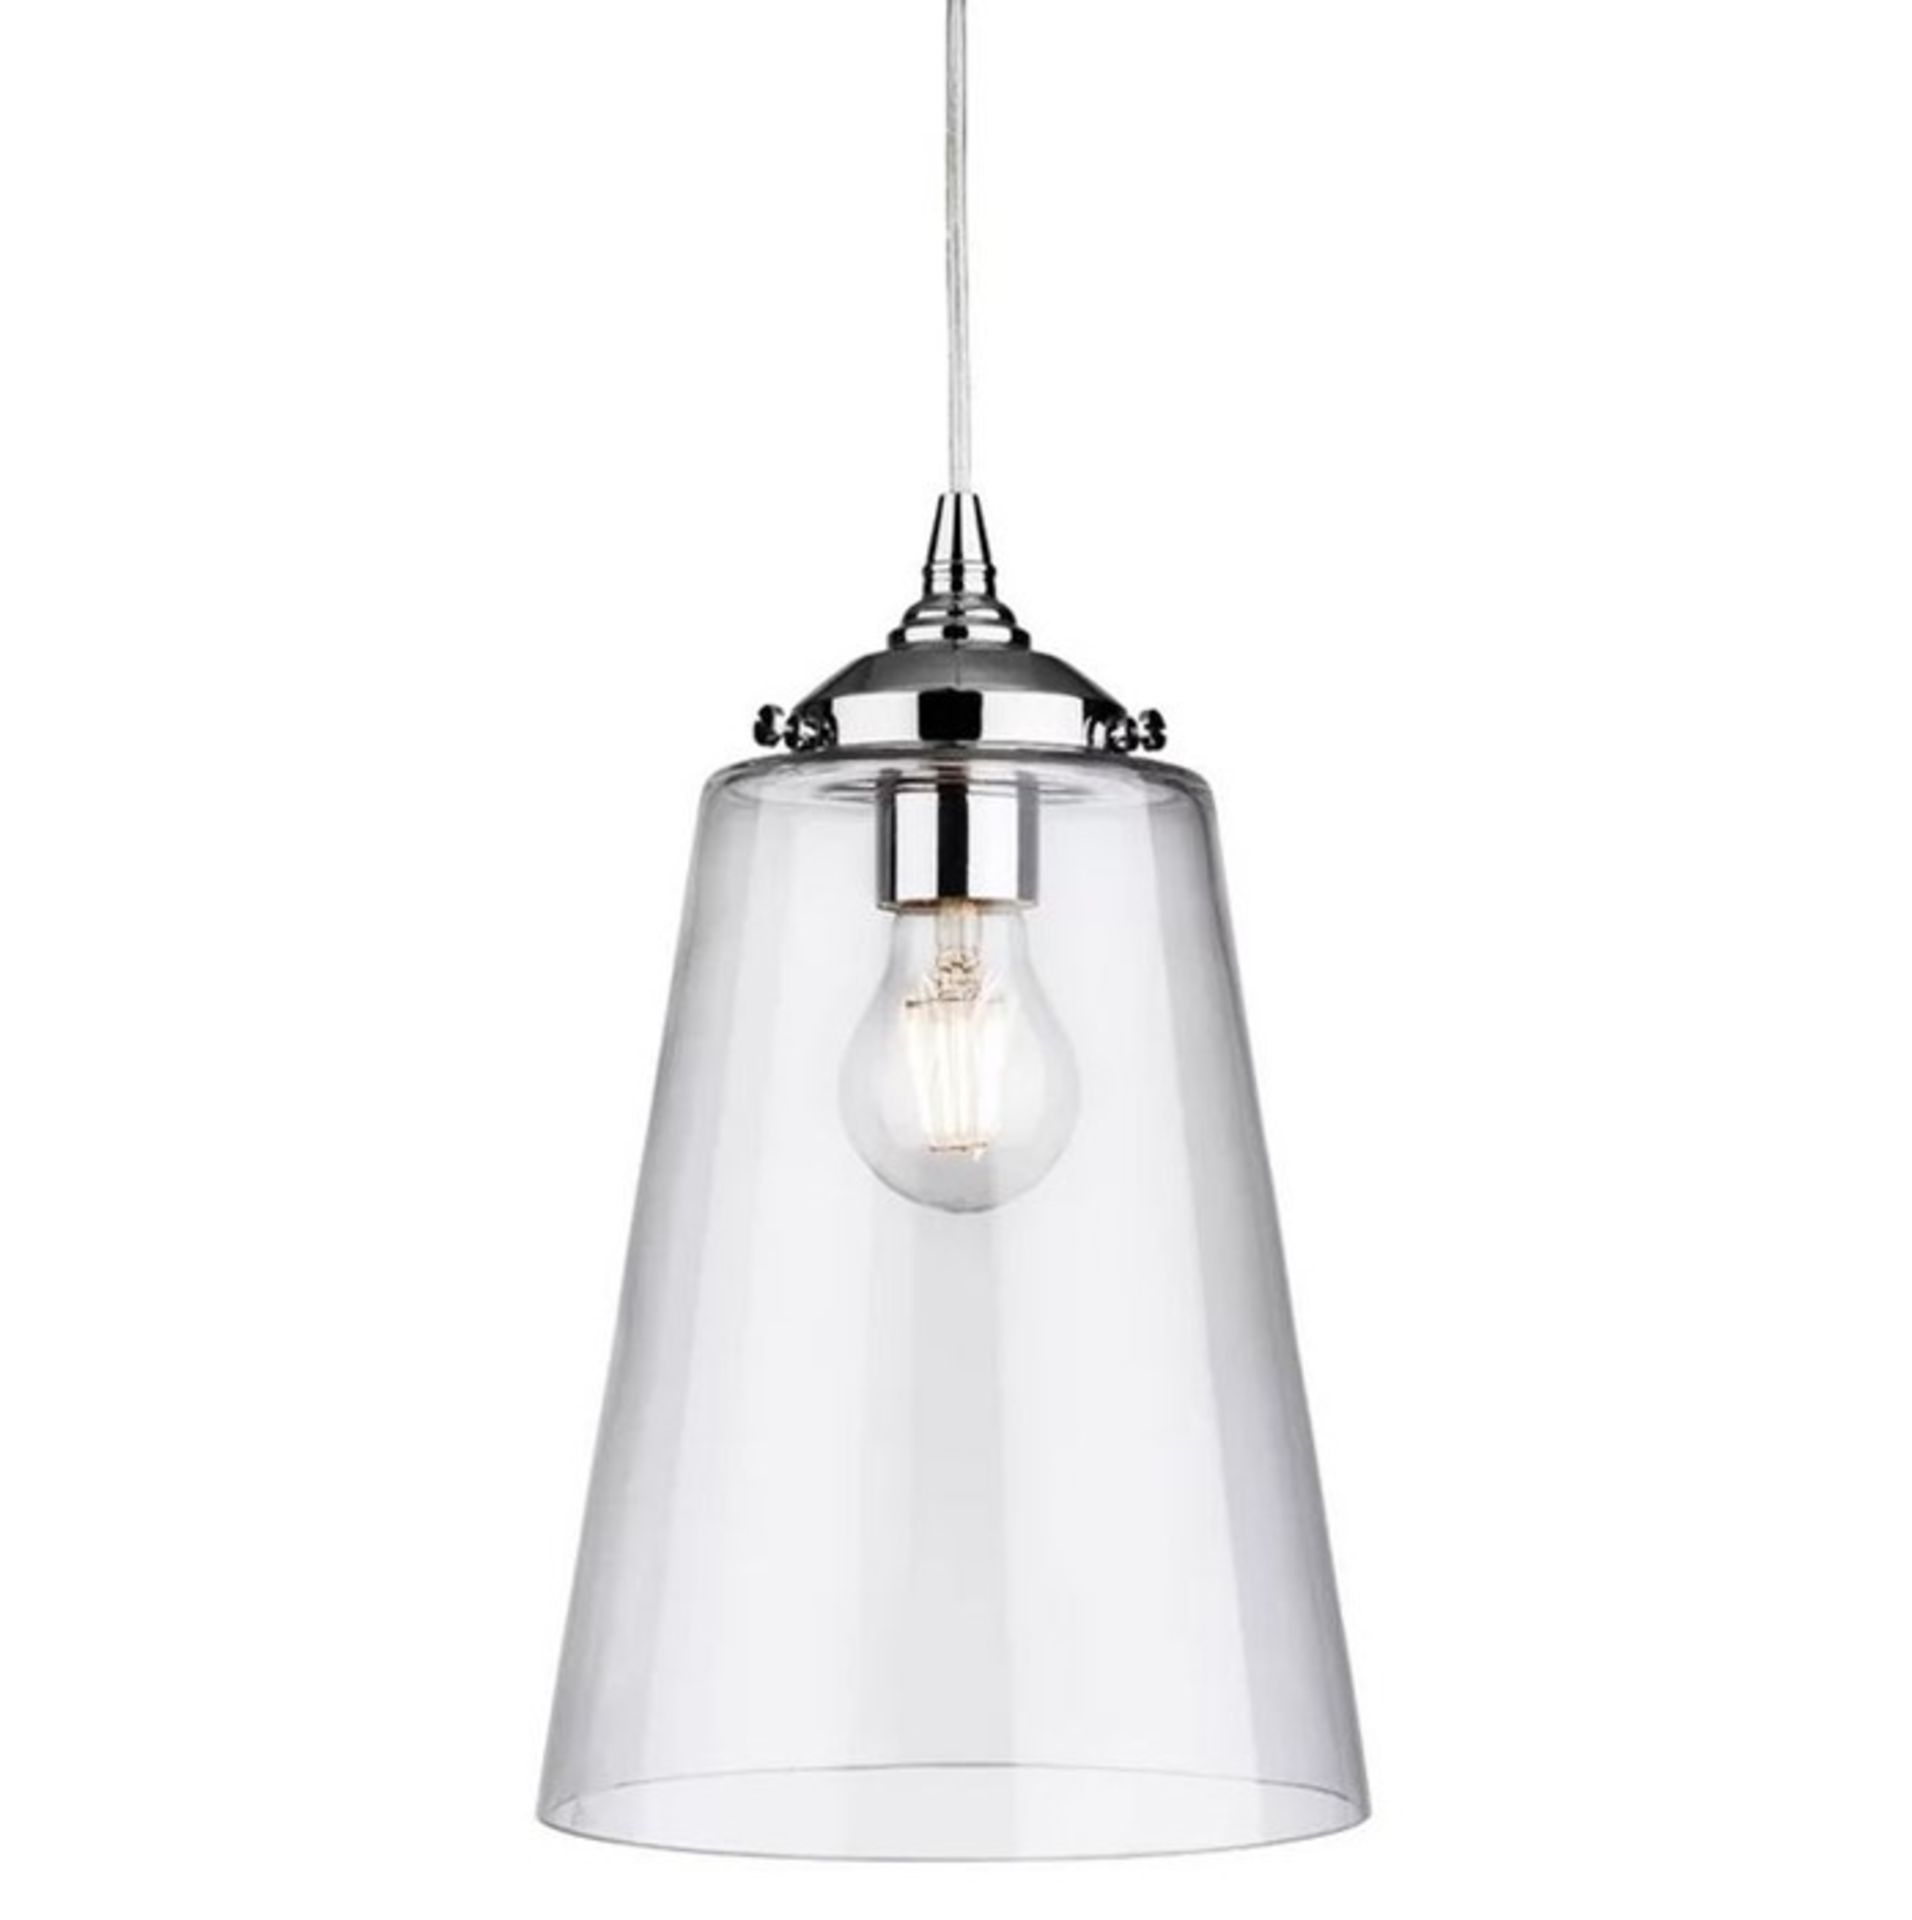 ANSLEY SEVILLE 1-LIGHT CONE PENDANT BY AUGUST GROVE